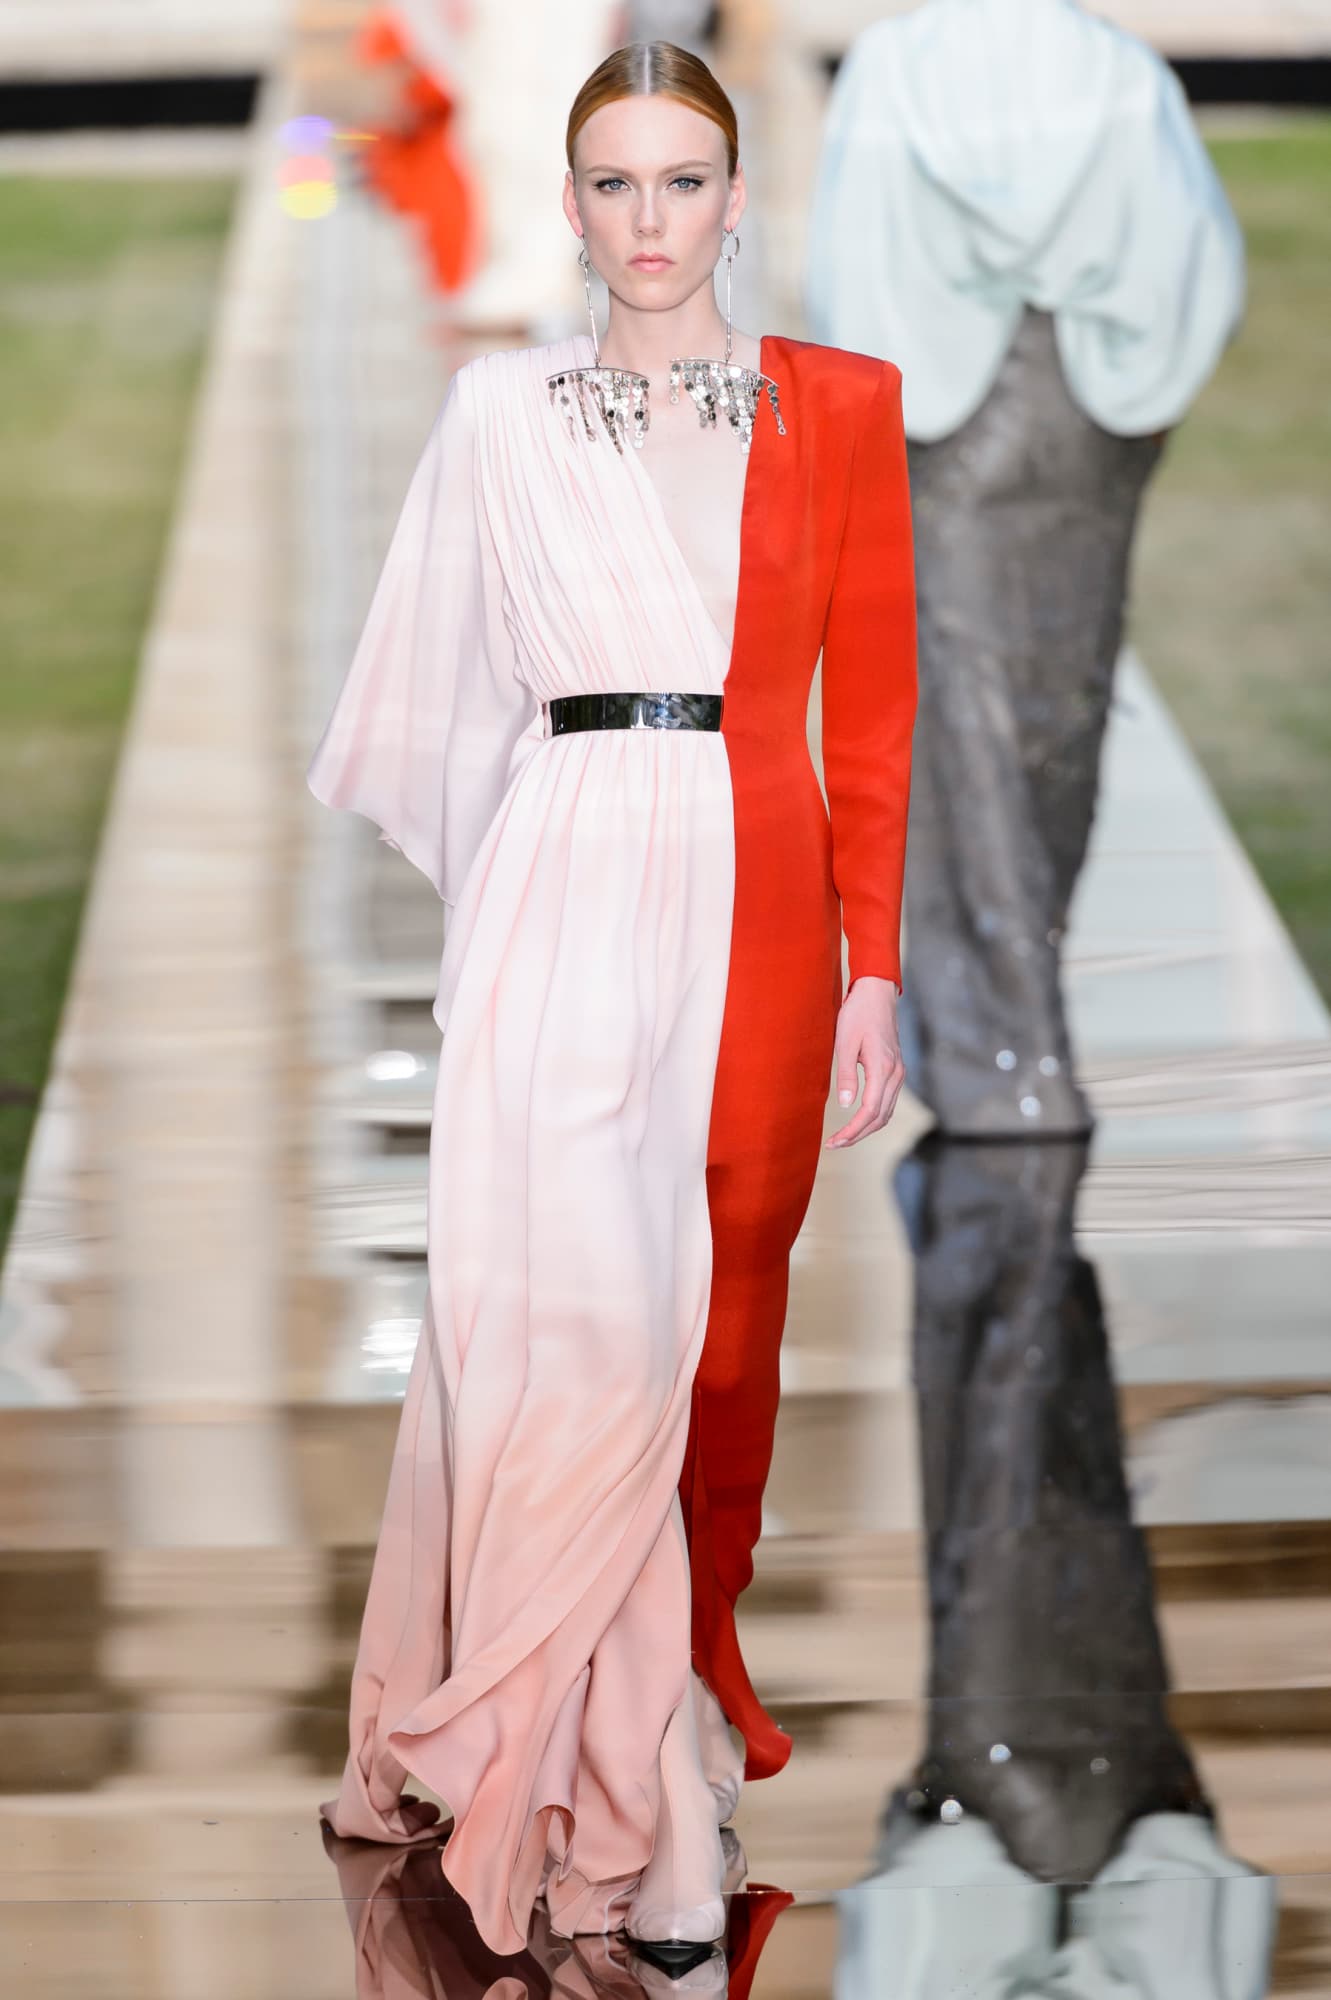 Clare Waight Keller Dedicates Couture Show To Givenchy | Fashion News ...